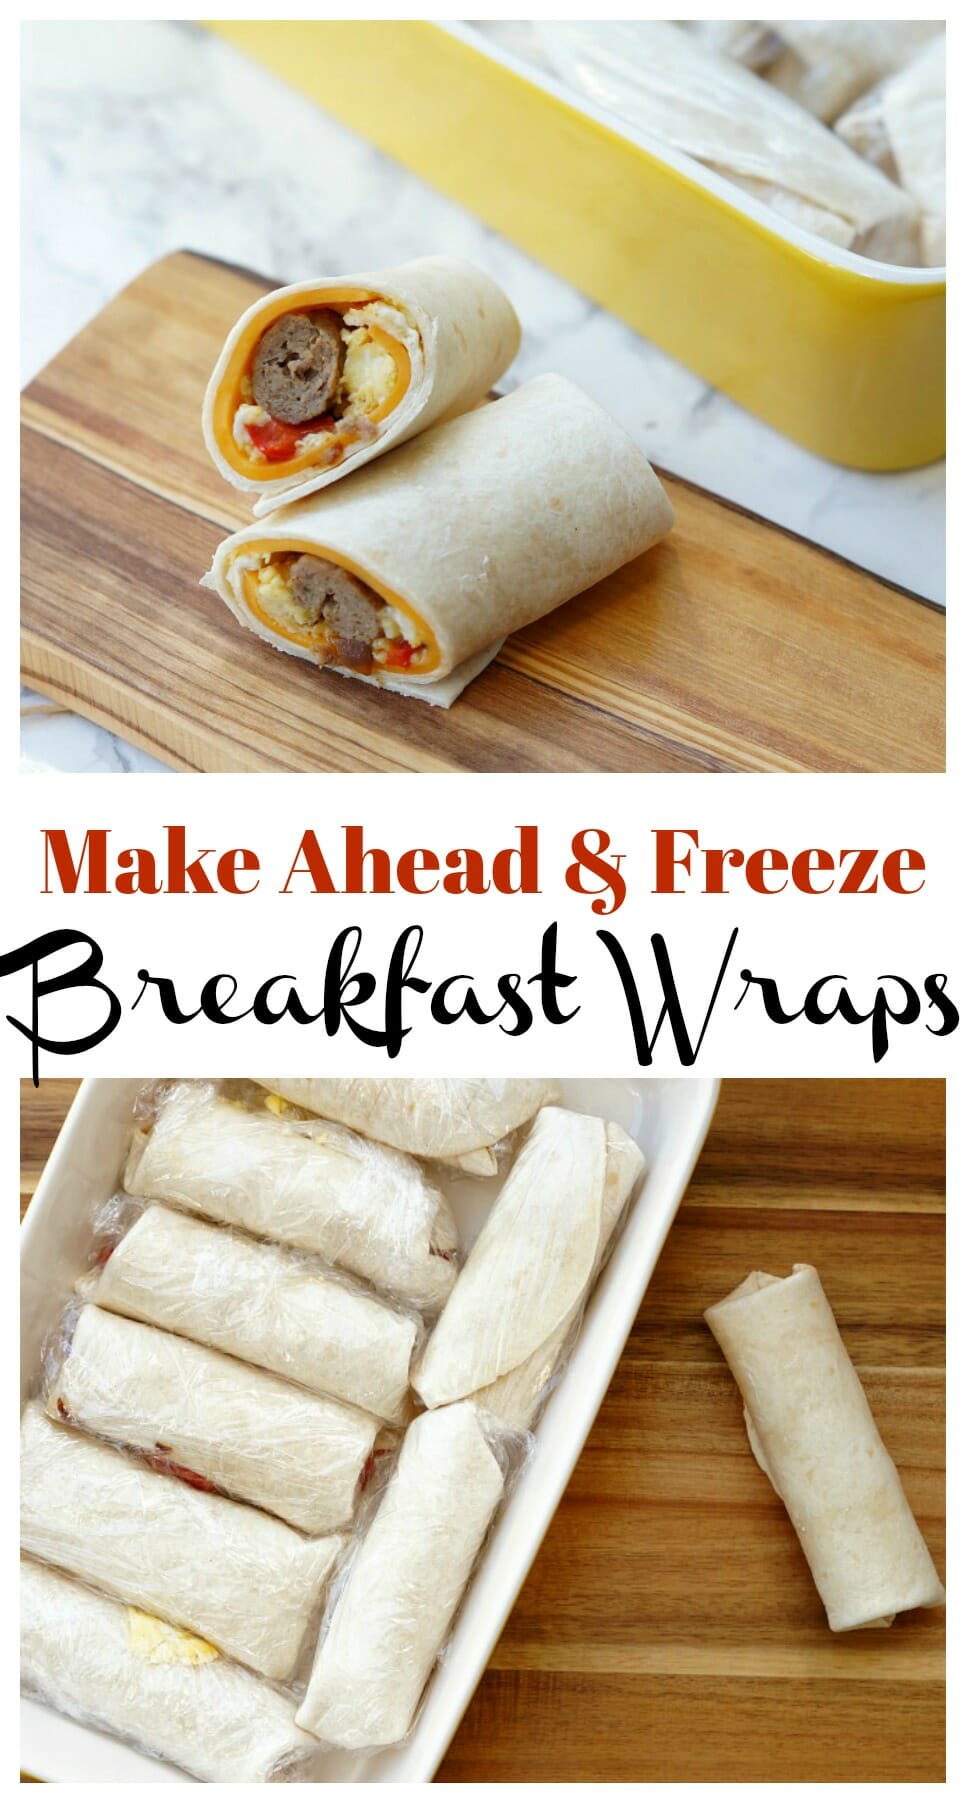 Make Ahead Breakfast Wraps. Sausage, egg, cheese, and veggie are all wrapped up for a quick breakfast!